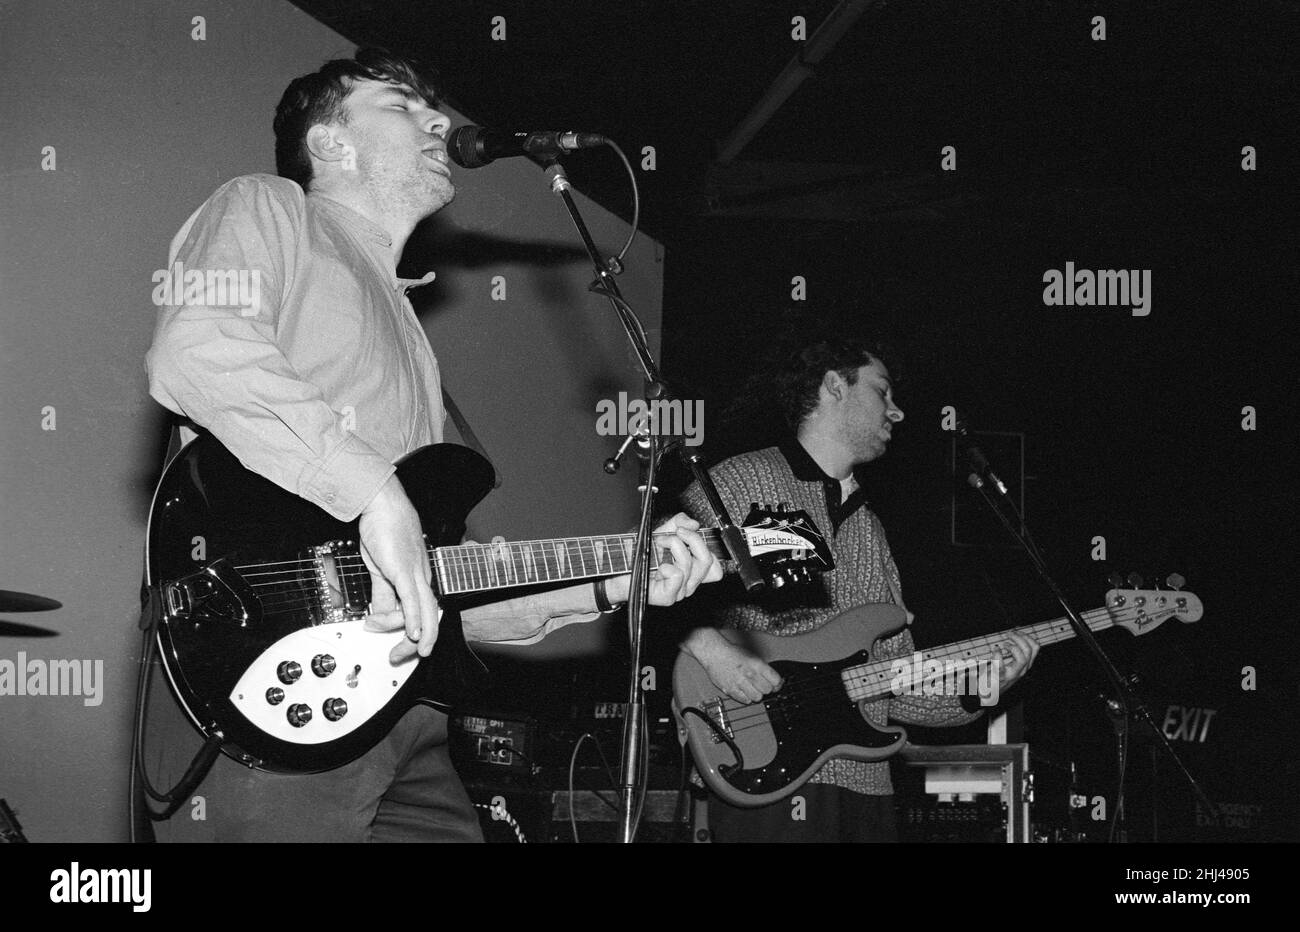 Alternative rock band Last Party performing at the Bowen West Theatre, Bedford, England, March 3rd 1990. Stock Photo